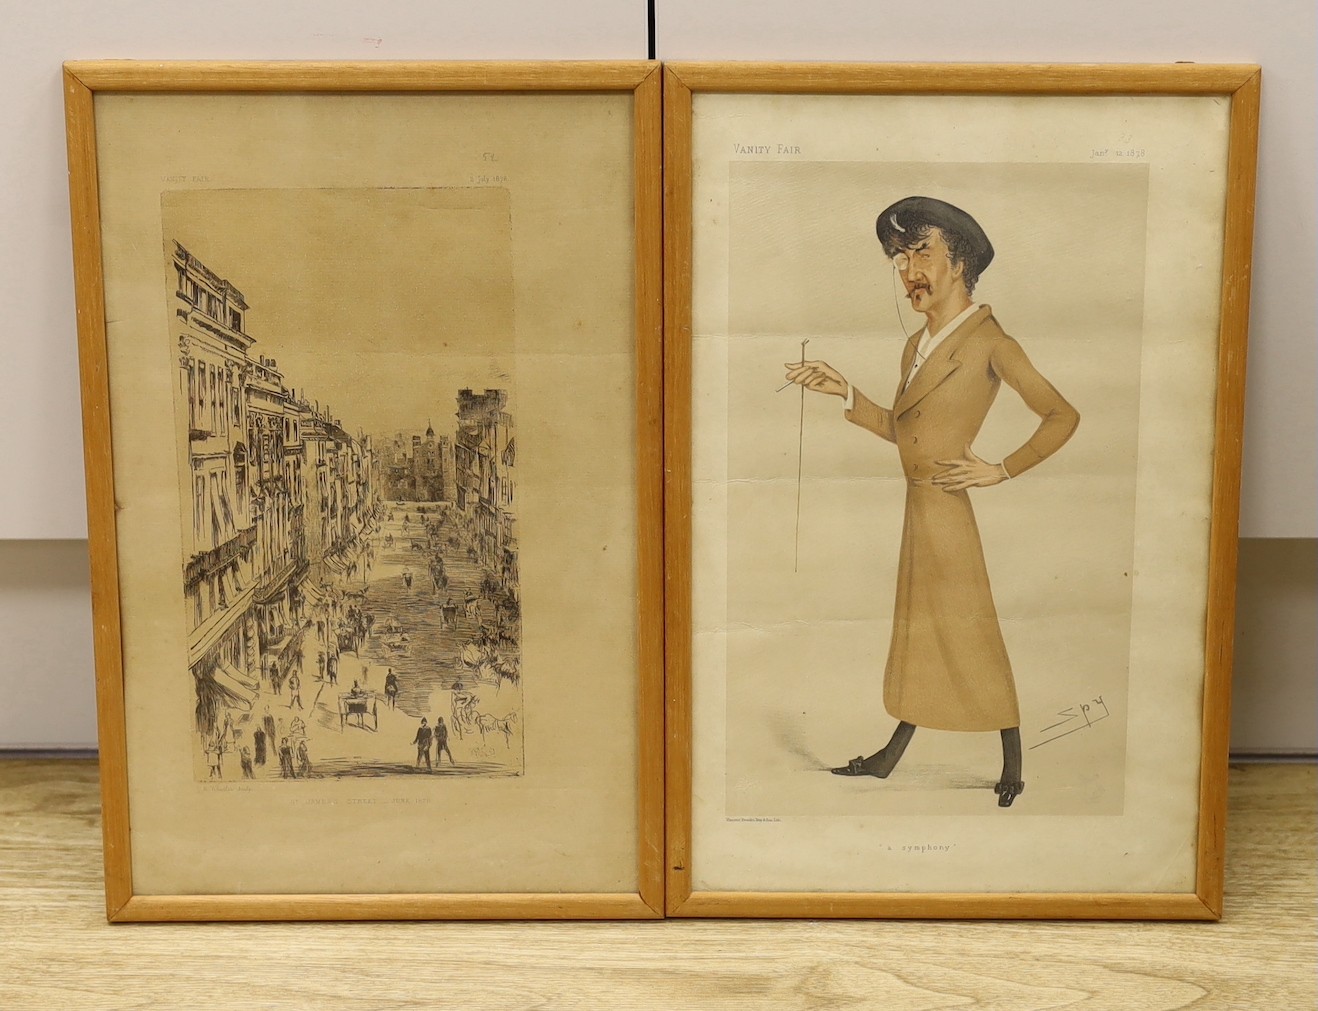 James Abbott McNeill Whistler (1834-1903), lithograph for Vanity Fair, 'St James's Street, June 1878', 28 x 16cm, with a Vanity Fair portrait of Whistler titled 'A Symphony', overall 37 x 23cm